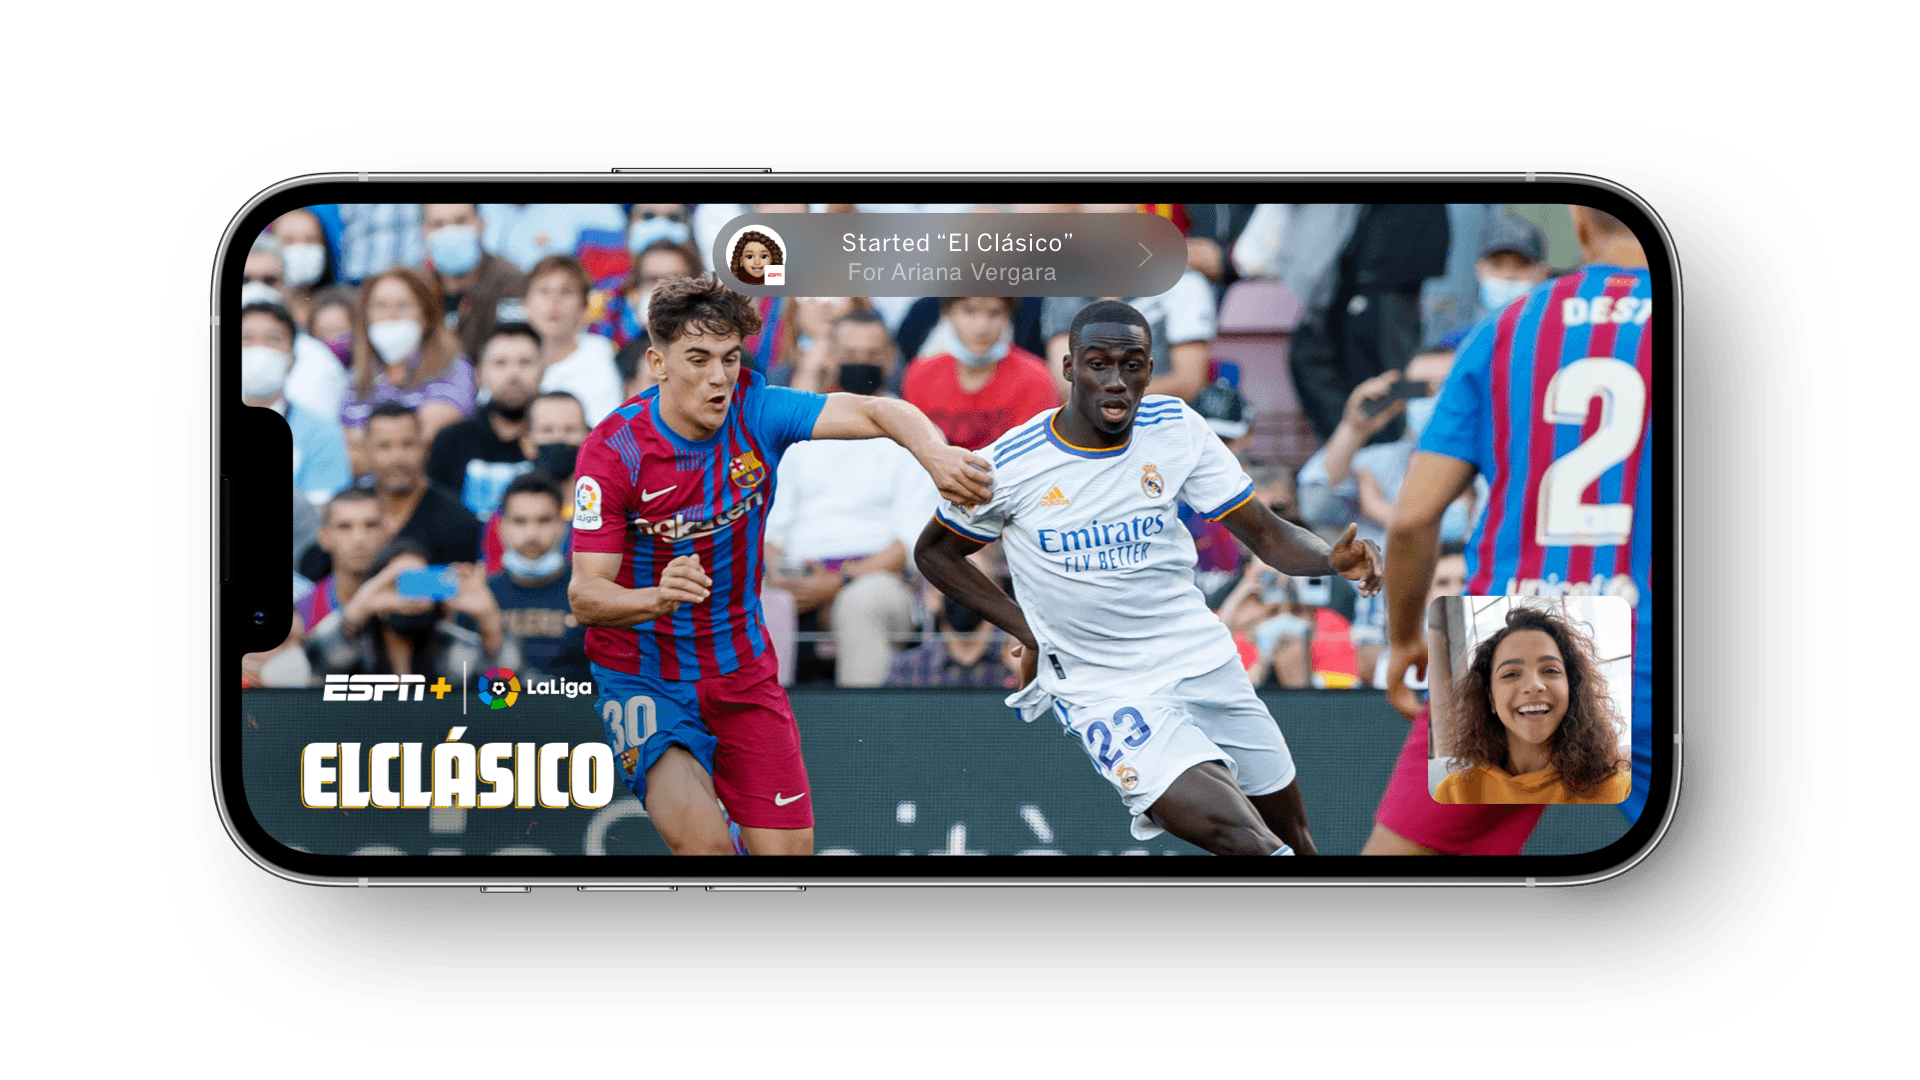 ESPN App Adds SharePlay Allowing Fans to Watch Live Sports Together Over FaceTime